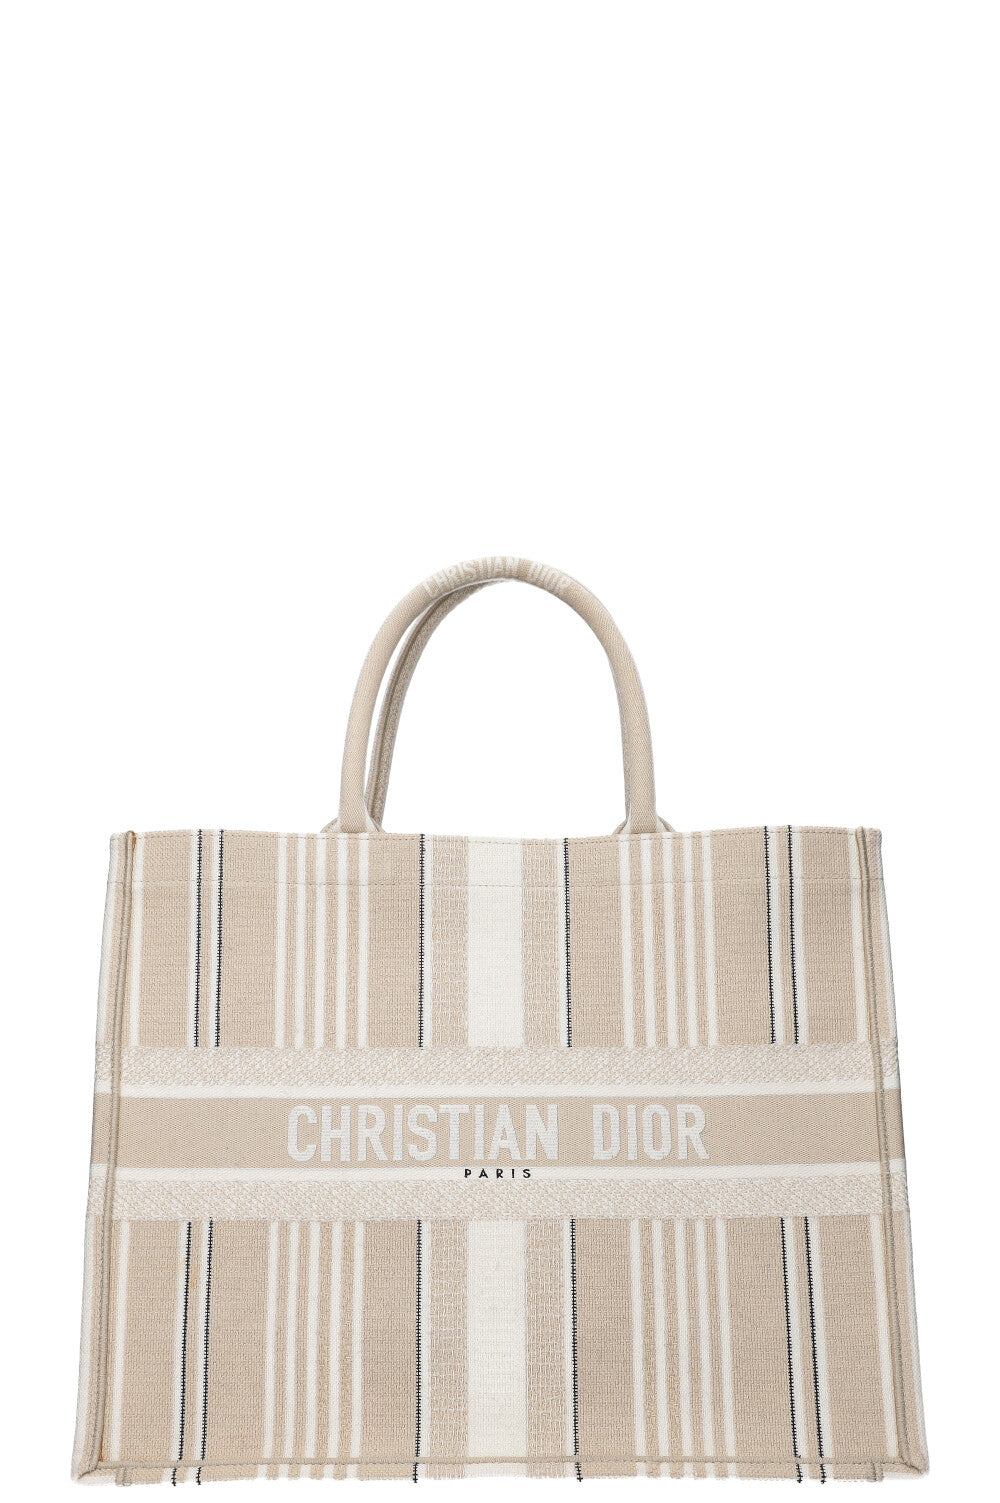 CHRISTIAN DIOR Book Tote Striped Ivory